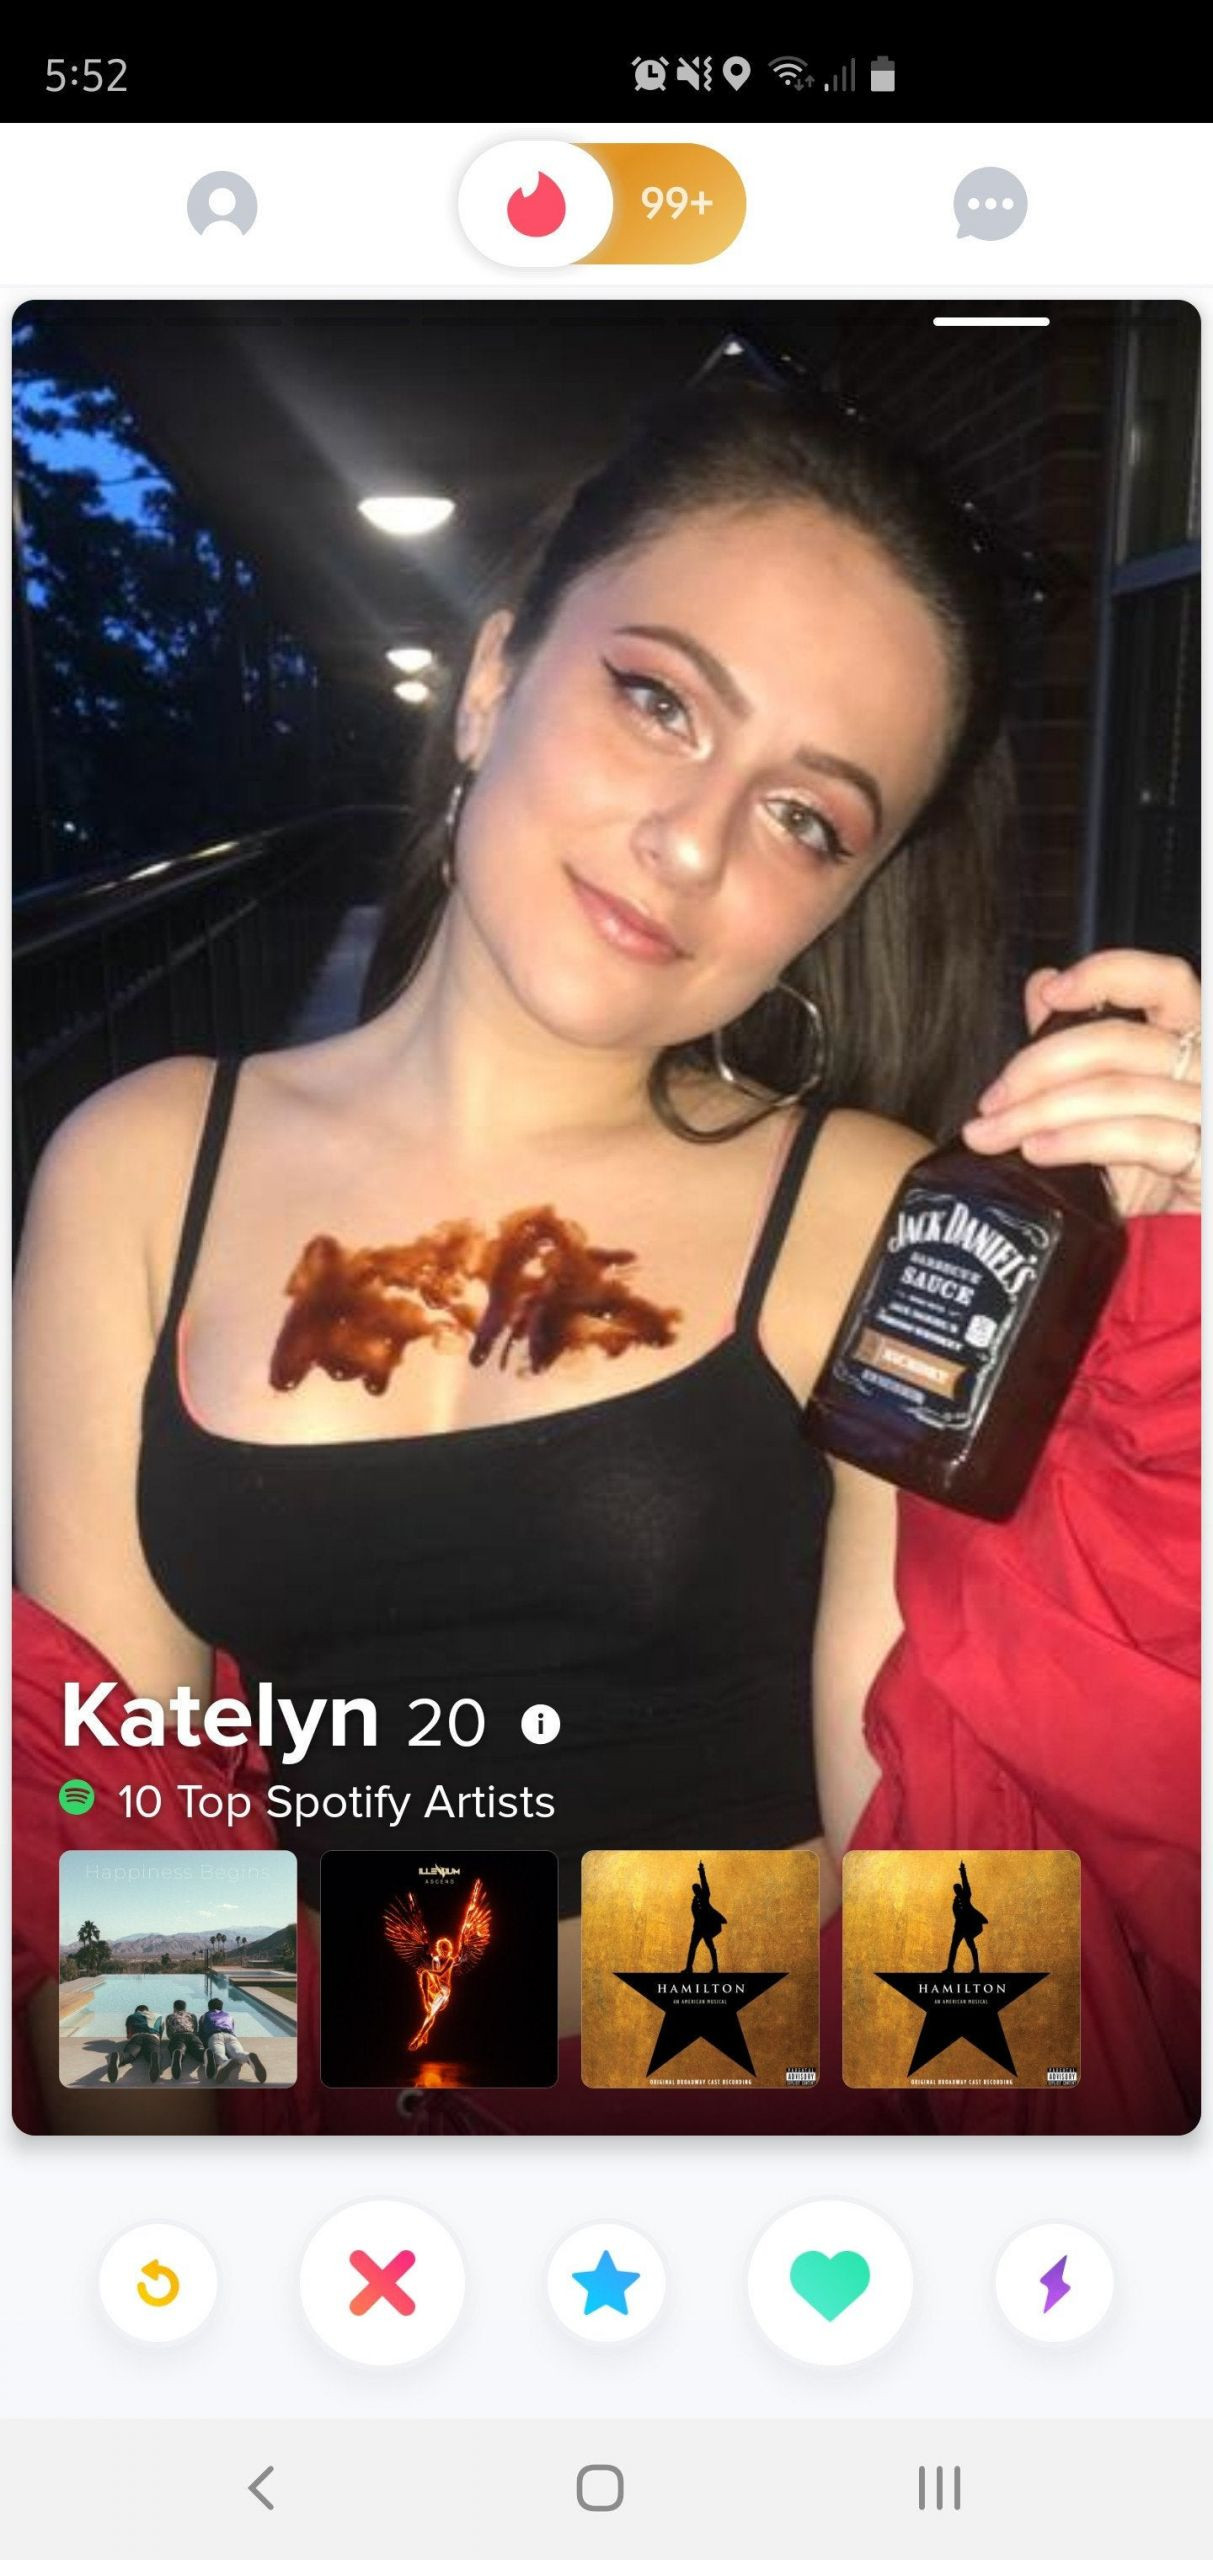 Bbq Sauce On My Tities New 22 the Best Ideas for Bbq Sauce My Titties – Home